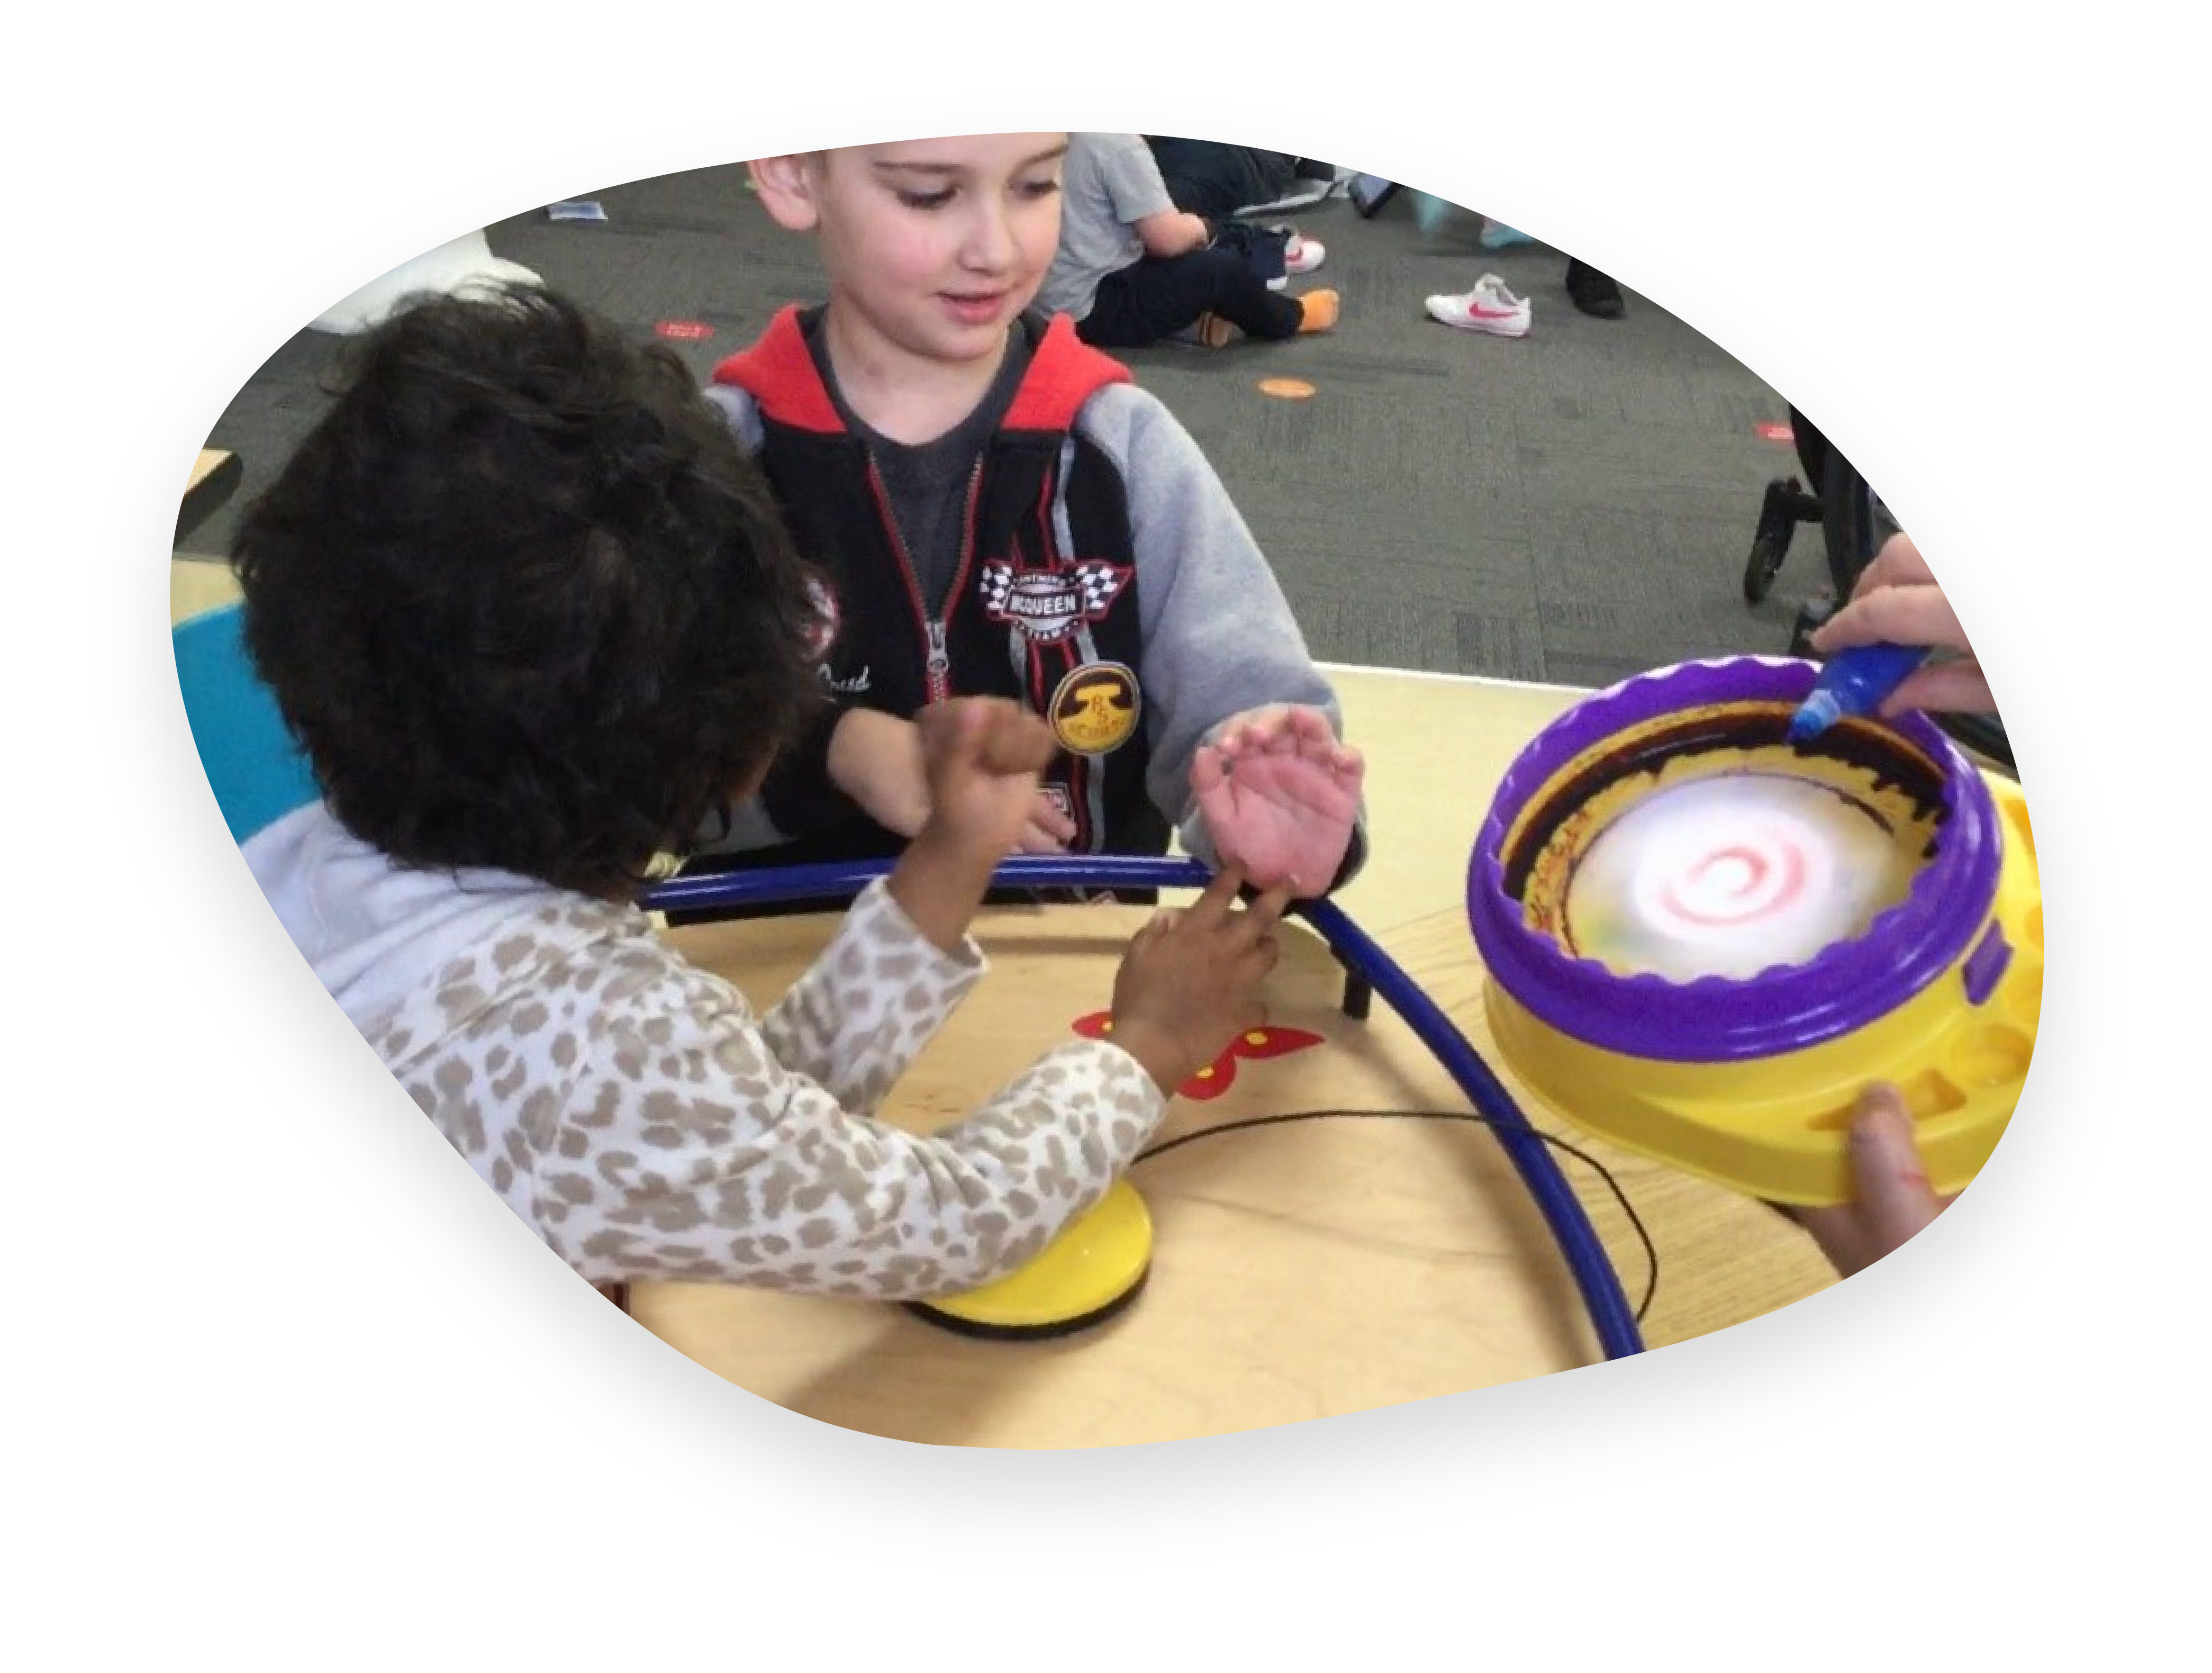 Two students participate in a painting activity using a spinner.